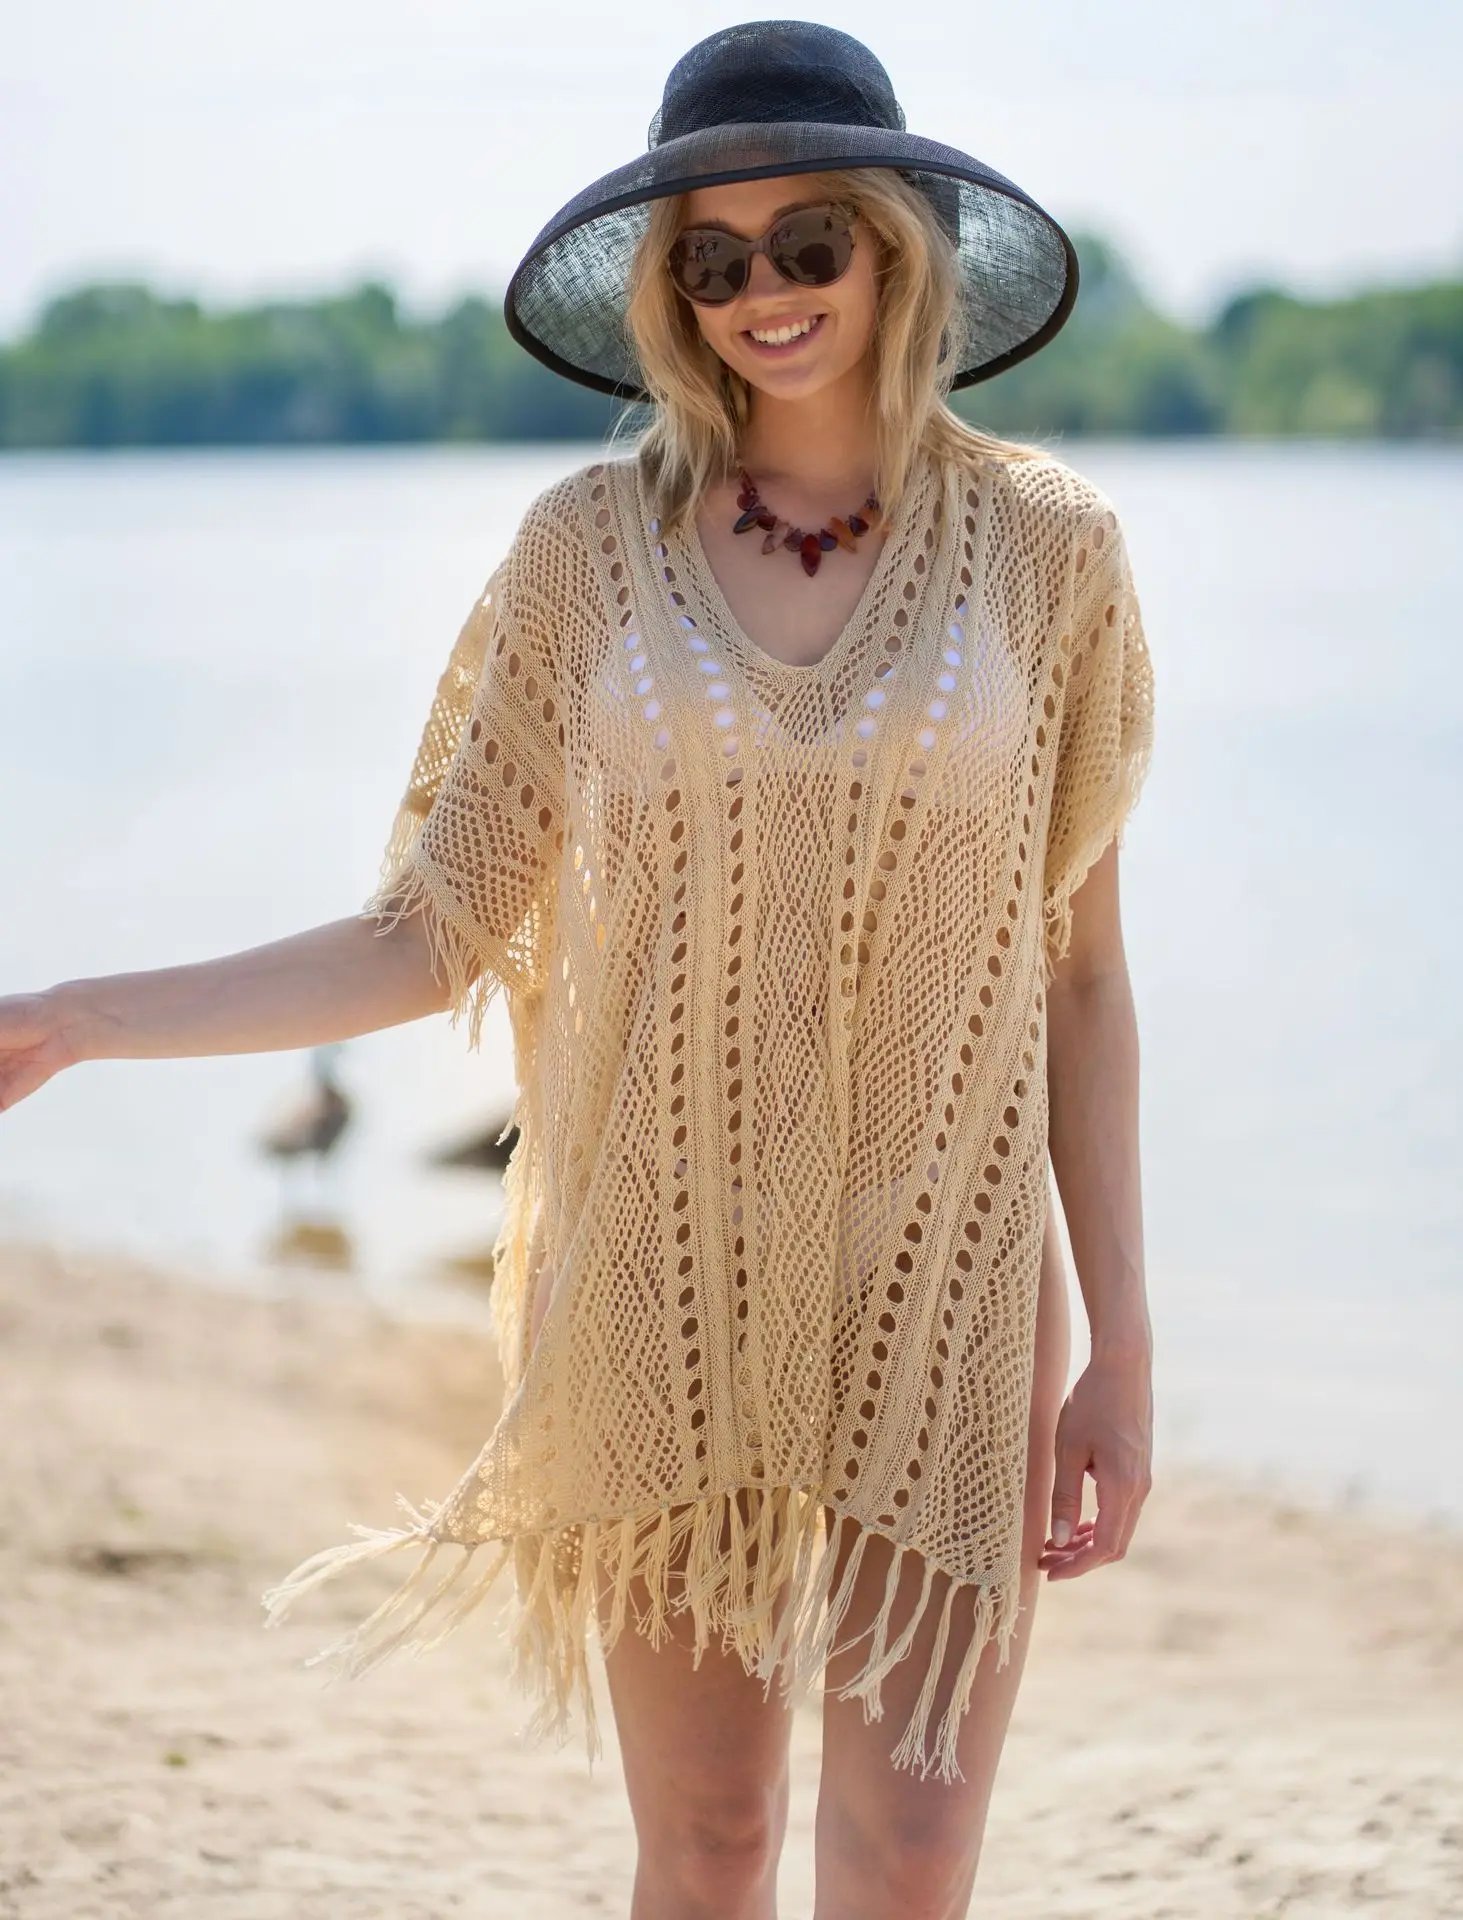 

Beige Crochet Tunic Sexy Hollow Out See Through Fringed Mini Dress Summer Clothes Women Beach Wear Swim Suit Cover Up